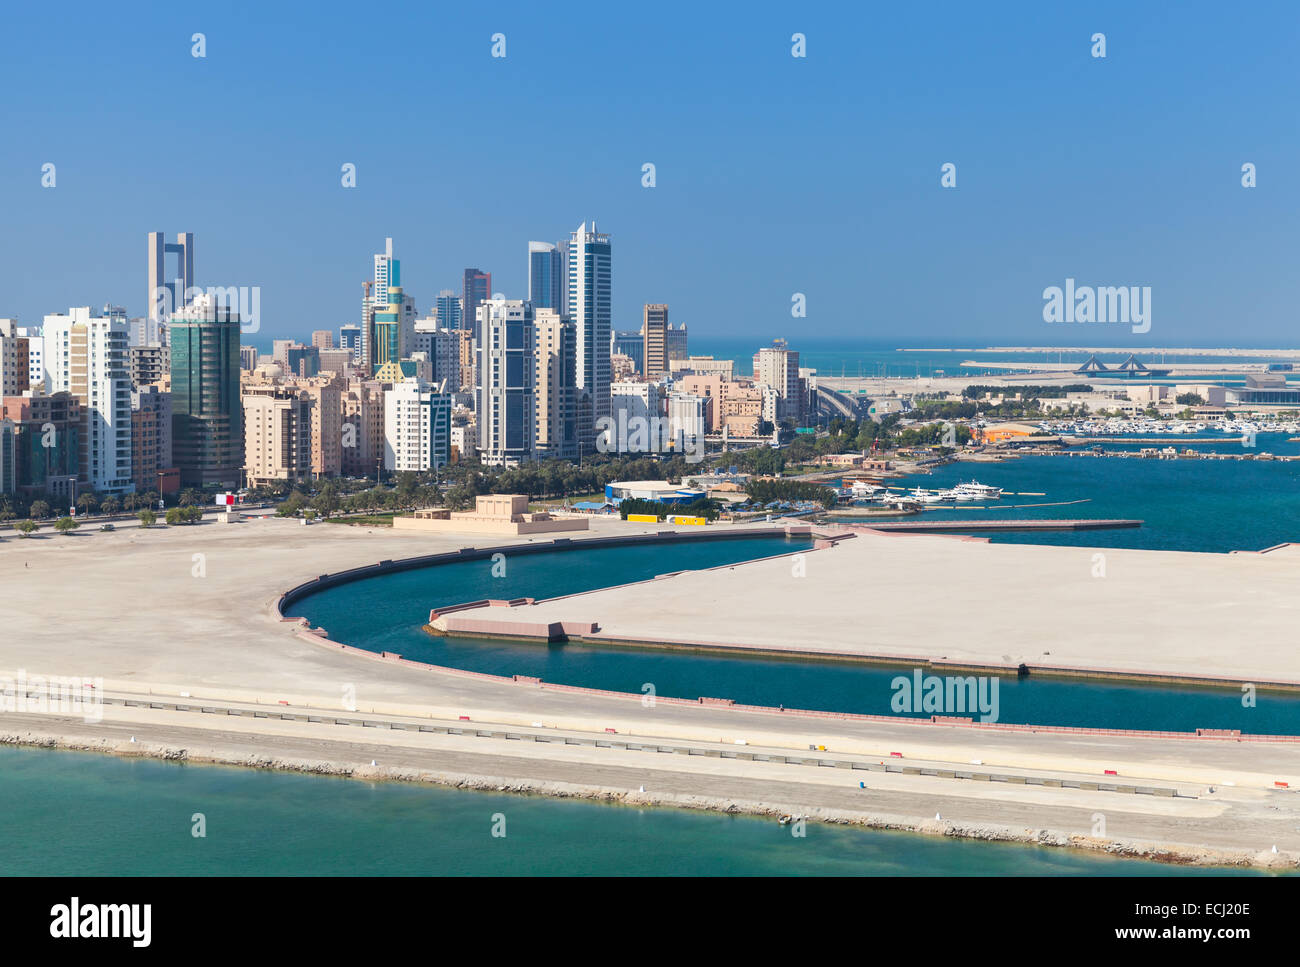 Bird view of Manama city, Bahrain. Skyline with modern skyscrapers standing on the coast of Persian Gulf Stock Photo